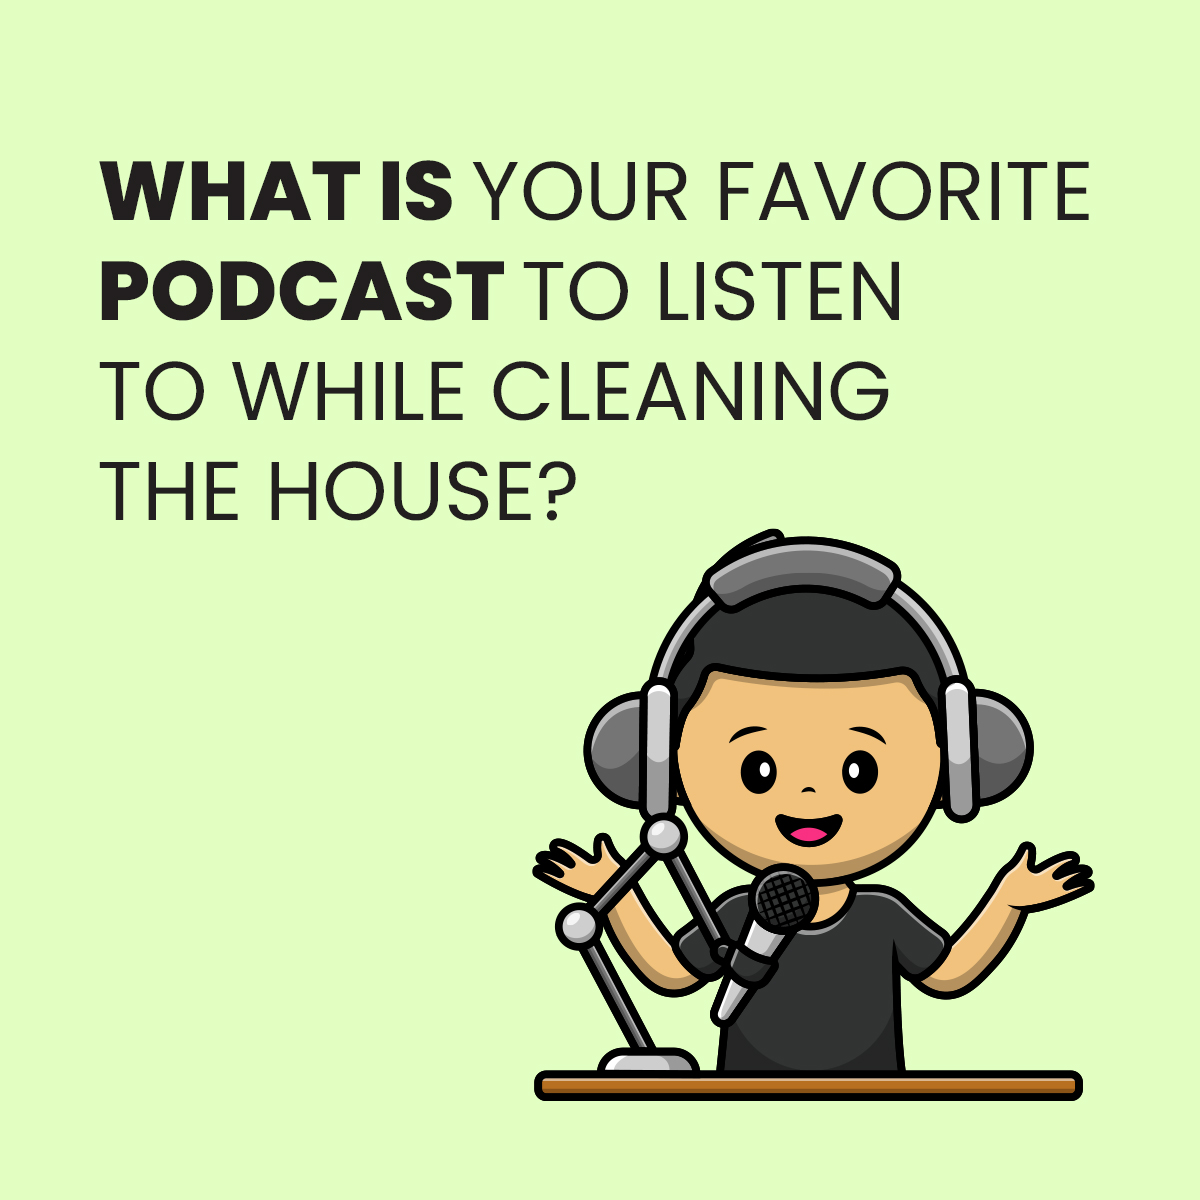 What is your favorite podcast to listen to while cleaning the house? Let me know in the comments.

#favoritething #love #travel #photography #beautiful